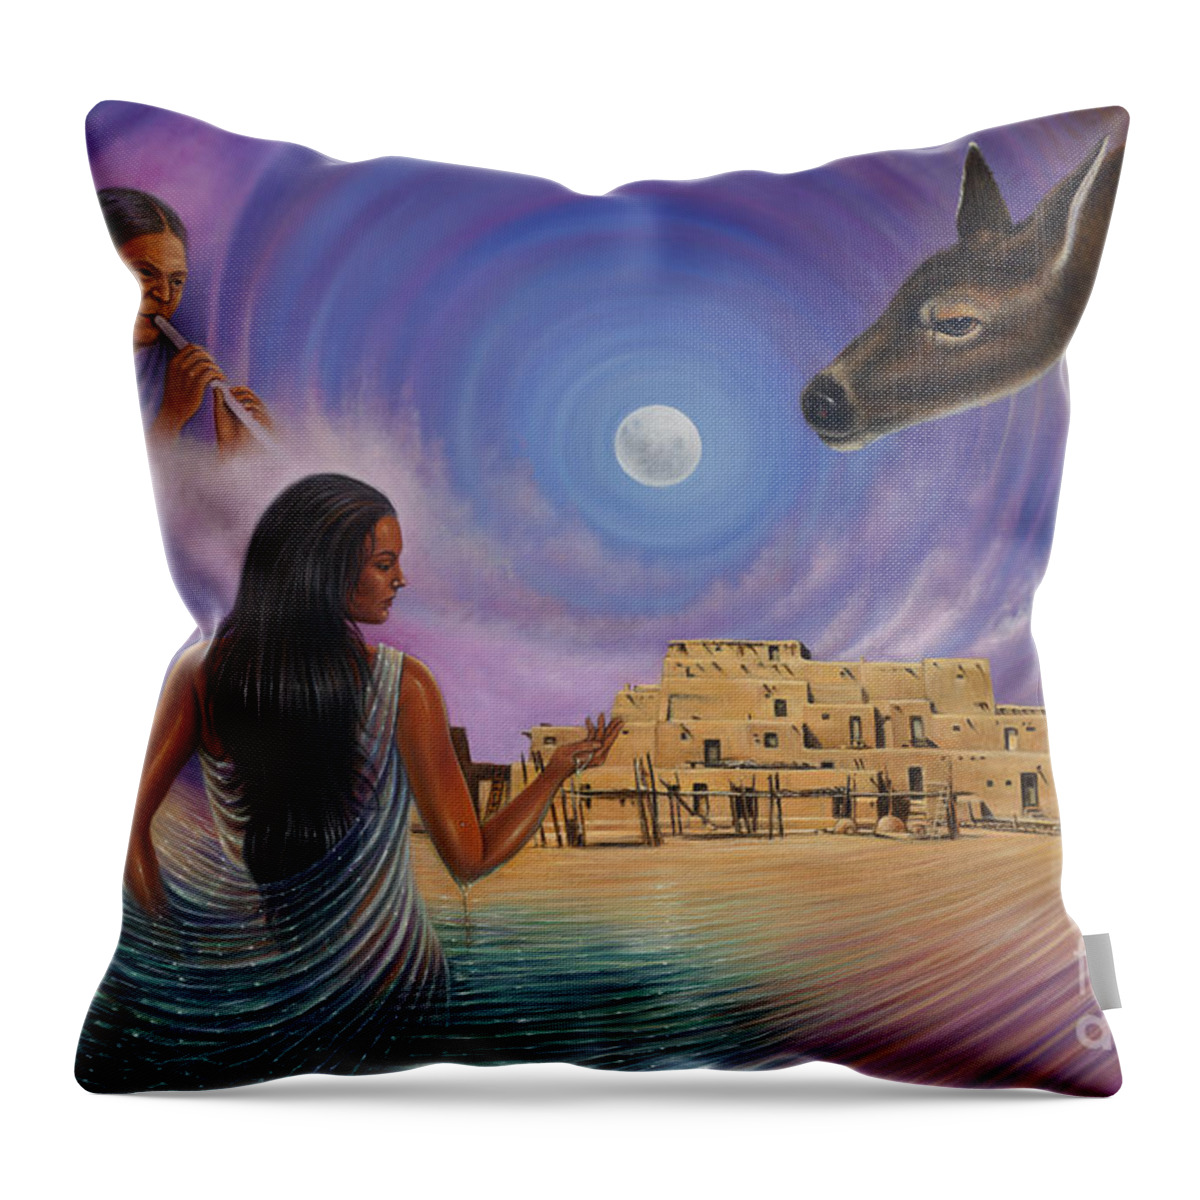 Taos Throw Pillow featuring the painting Dynamic Taos Il by Ricardo Chavez-Mendez